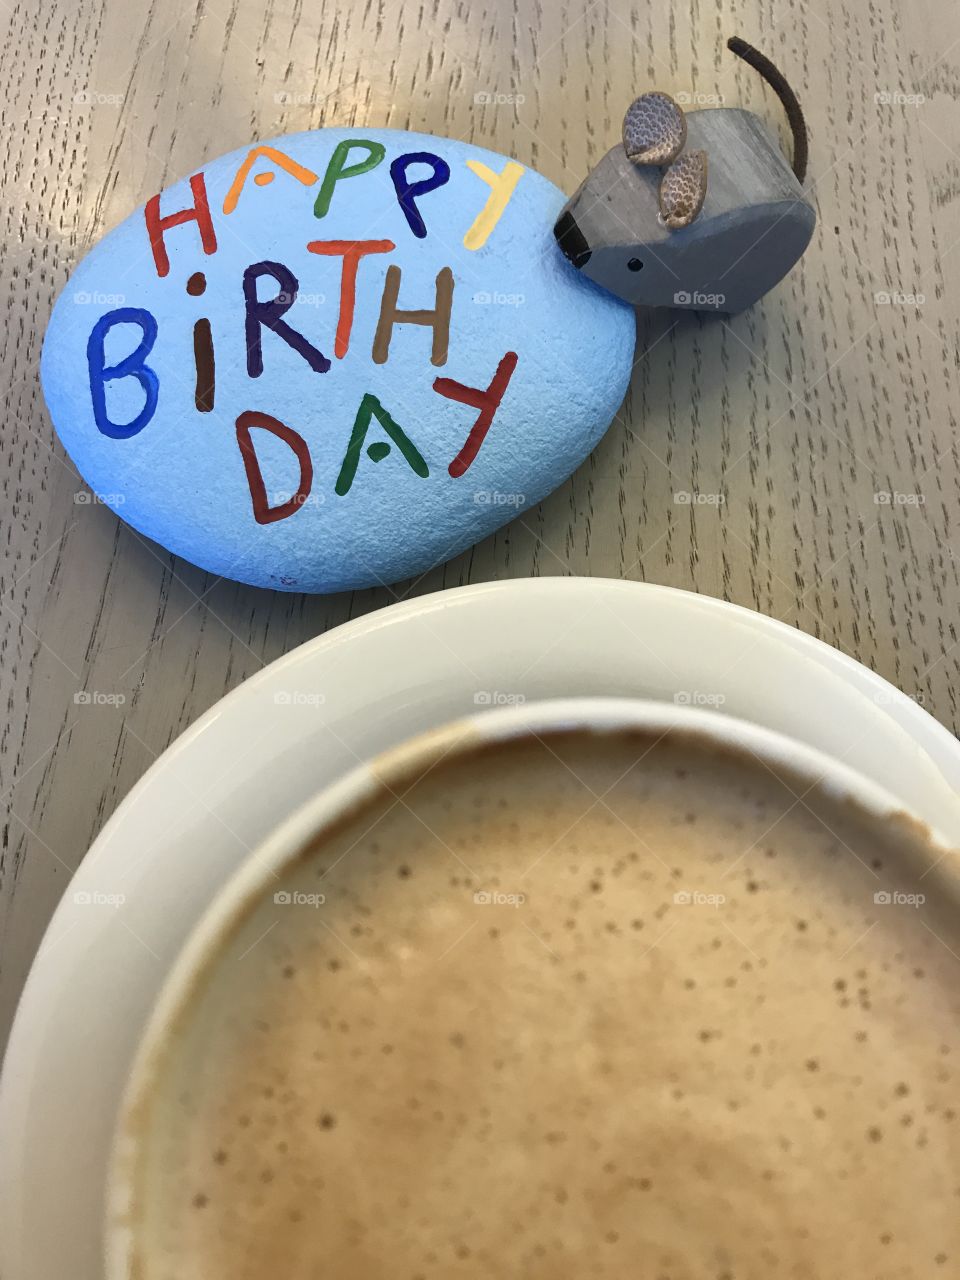 Happy Birthday to you, morning message with a stone